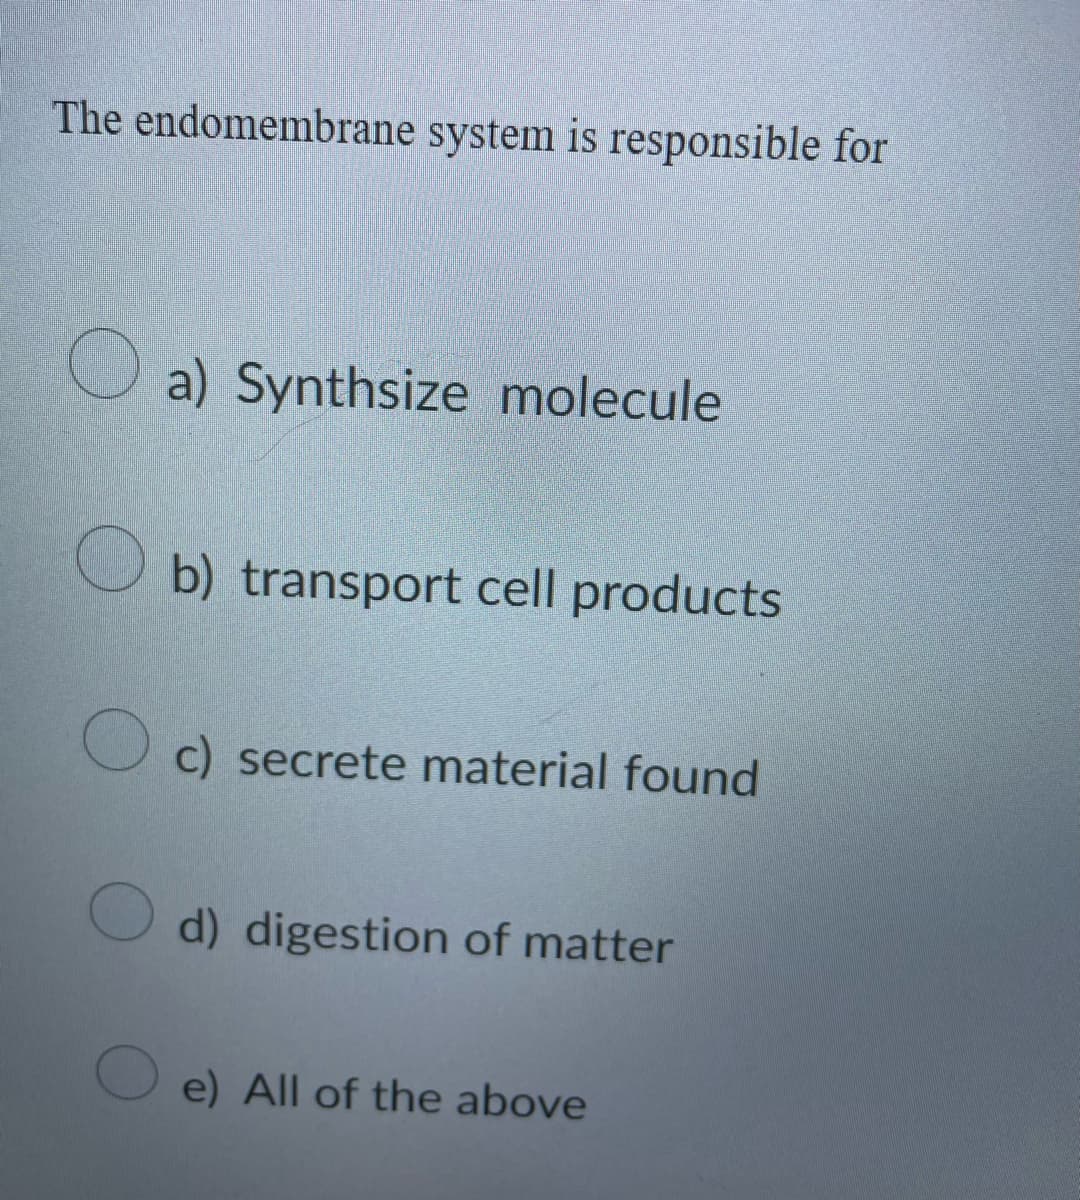 The endomembrane system is responsible for
O a) Synthsize molecule
O b) transport cell products
c) secrete material found
d) digestion of matter
e) All of the above
